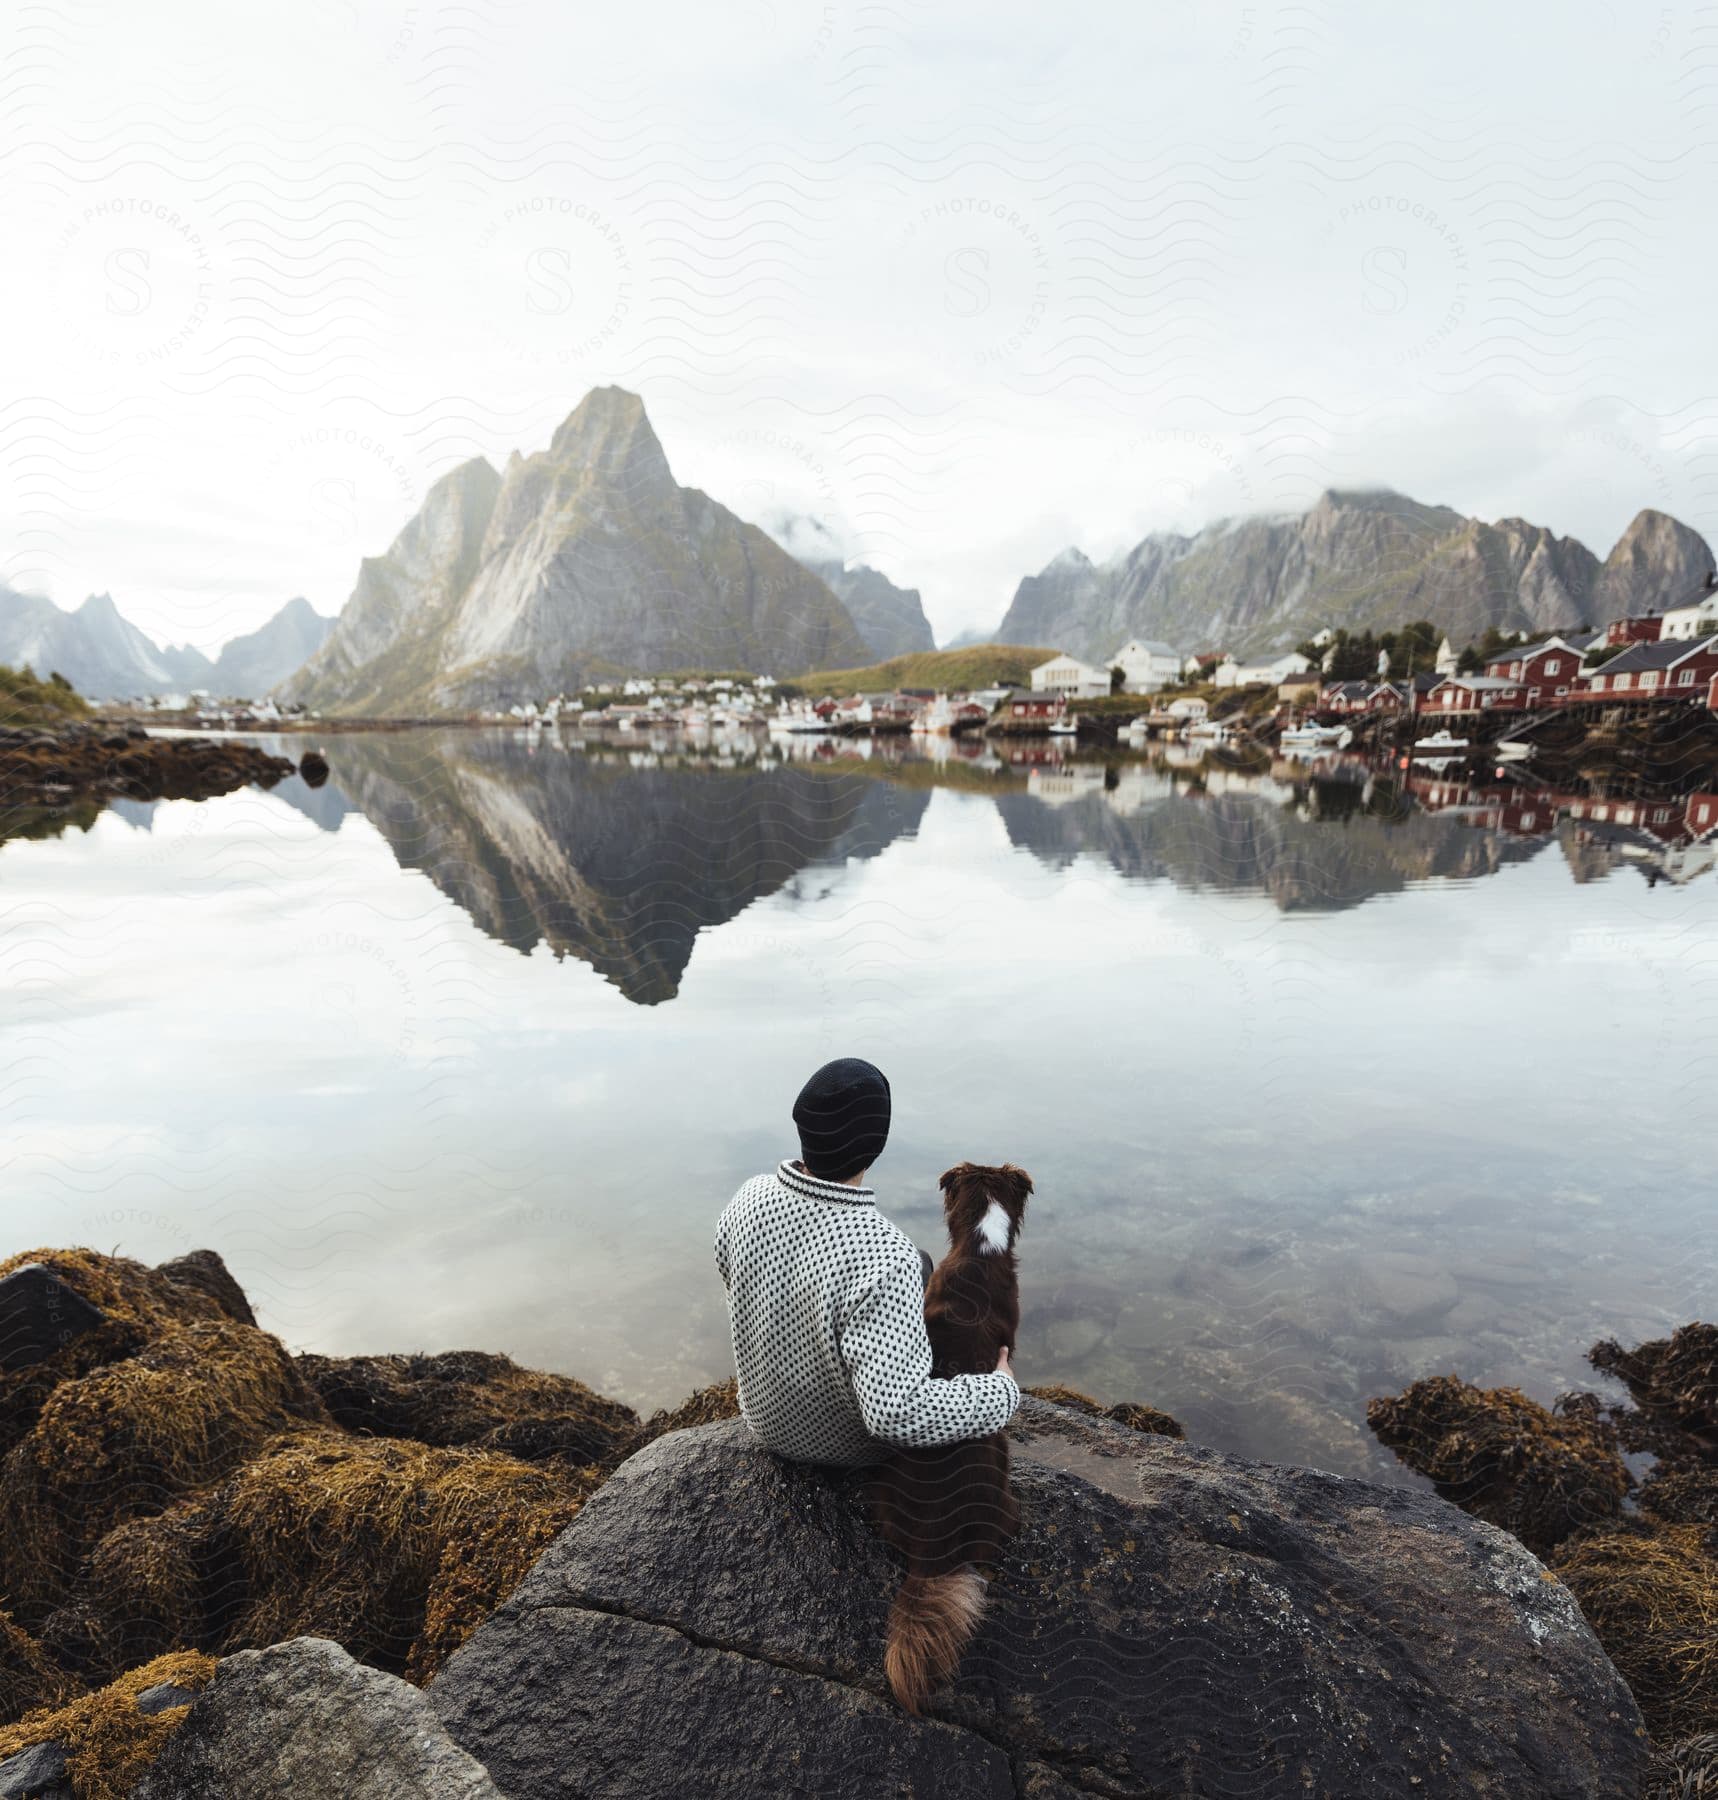 A man and his dog enjoying the scenic view of a lake surrounded by mountains in norway